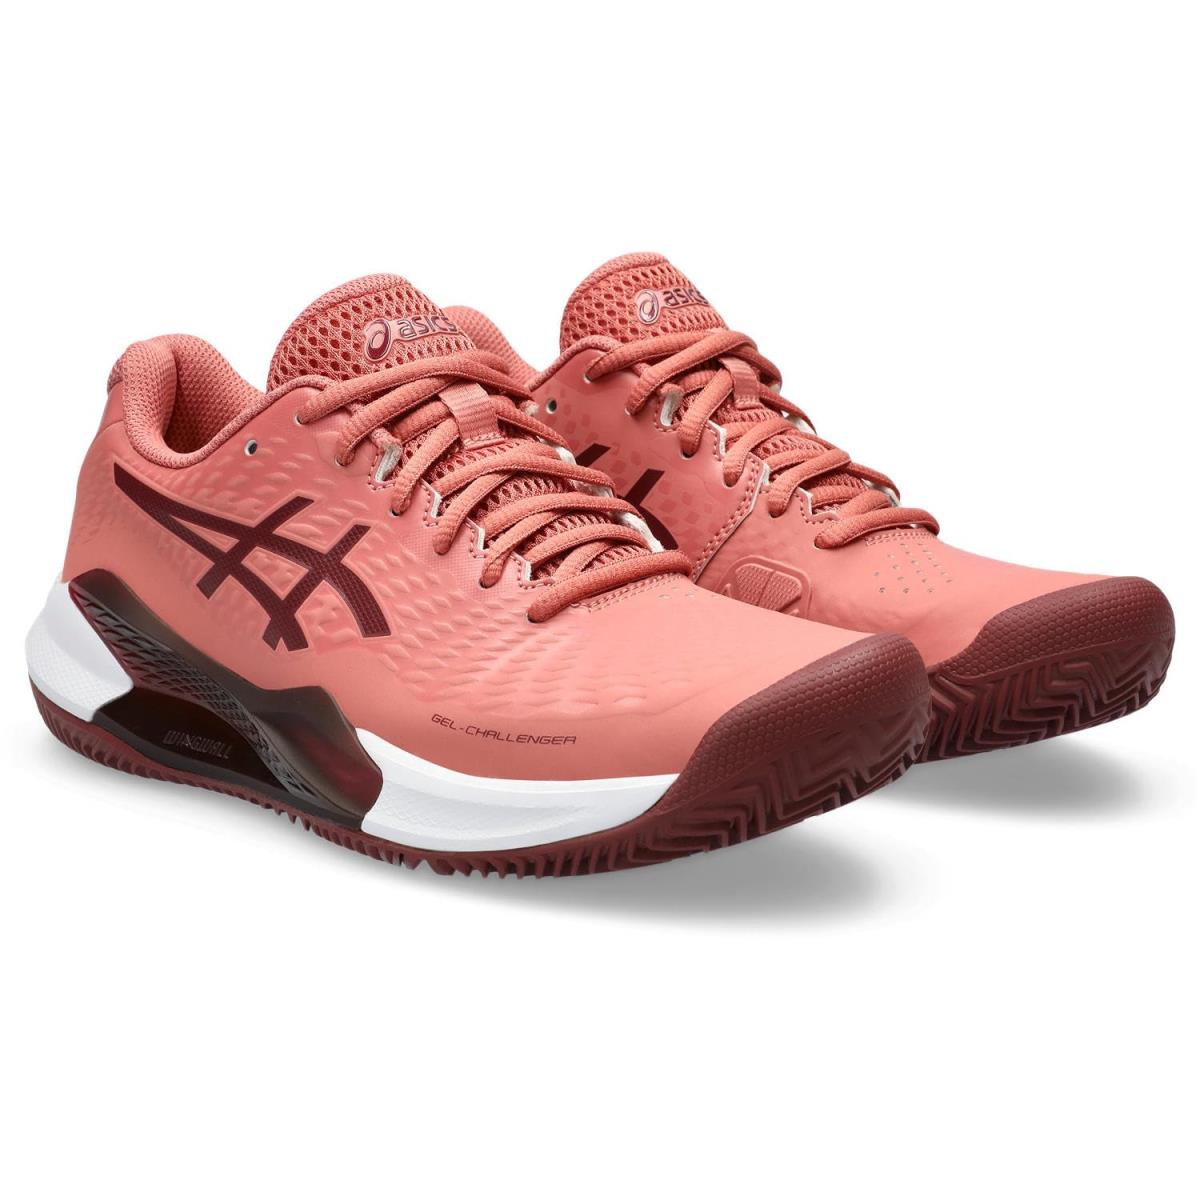 Woman`s Sneakers Athletic Shoes Asics Gel-challenger 14 Clay Light Garnet/Antique Red